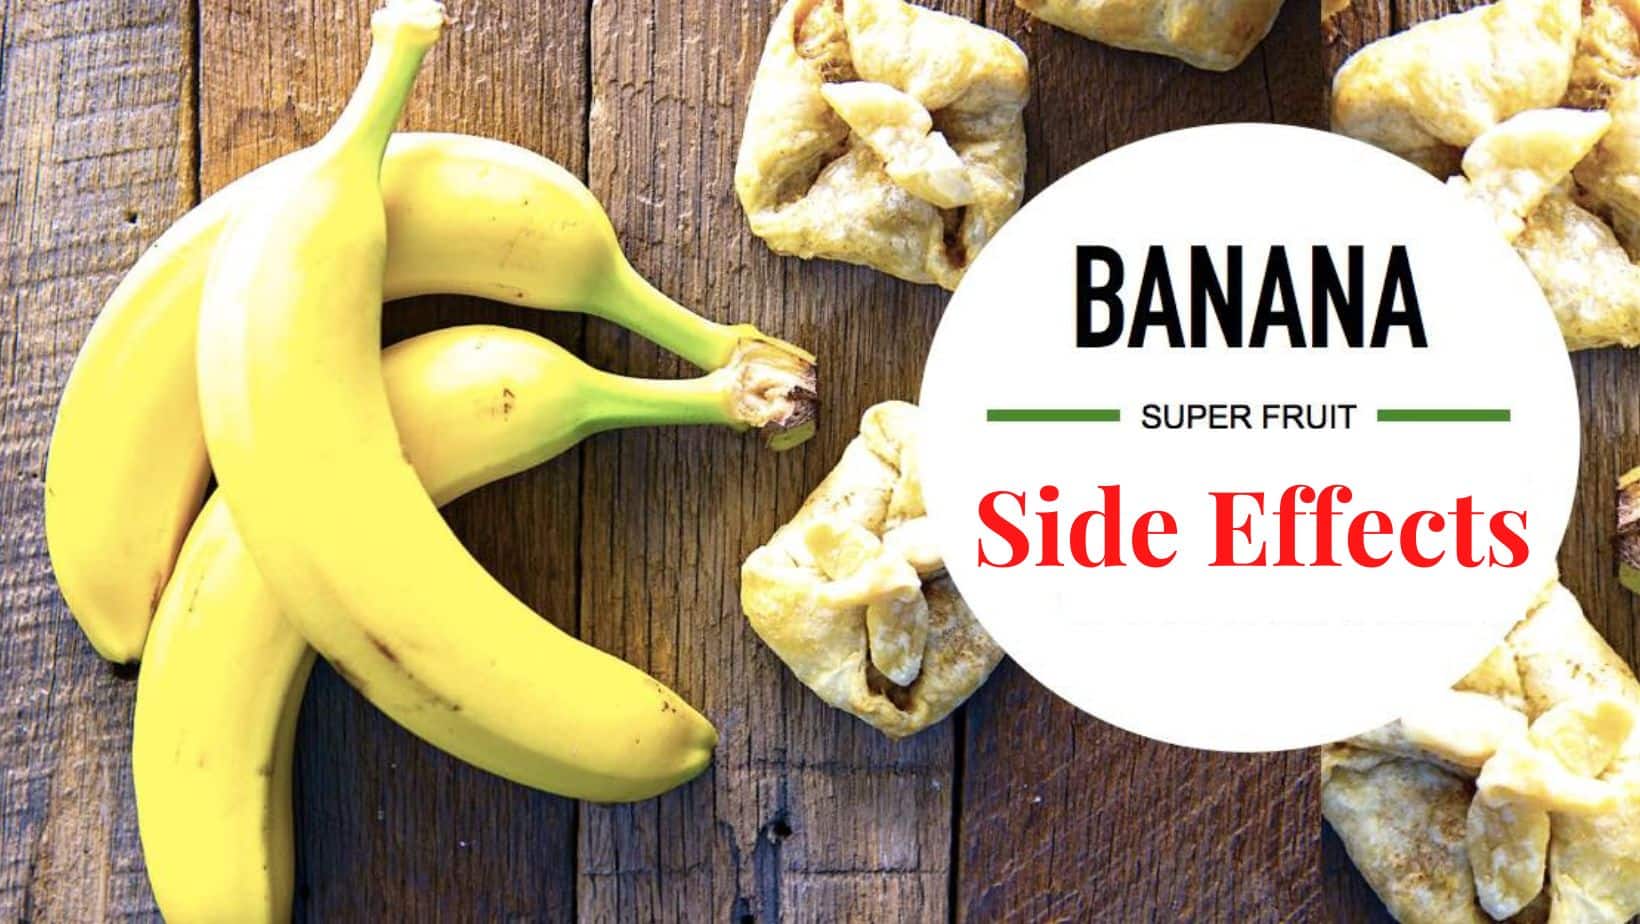 7 Dangerous Side Effects Of Eating Too Many Bananas